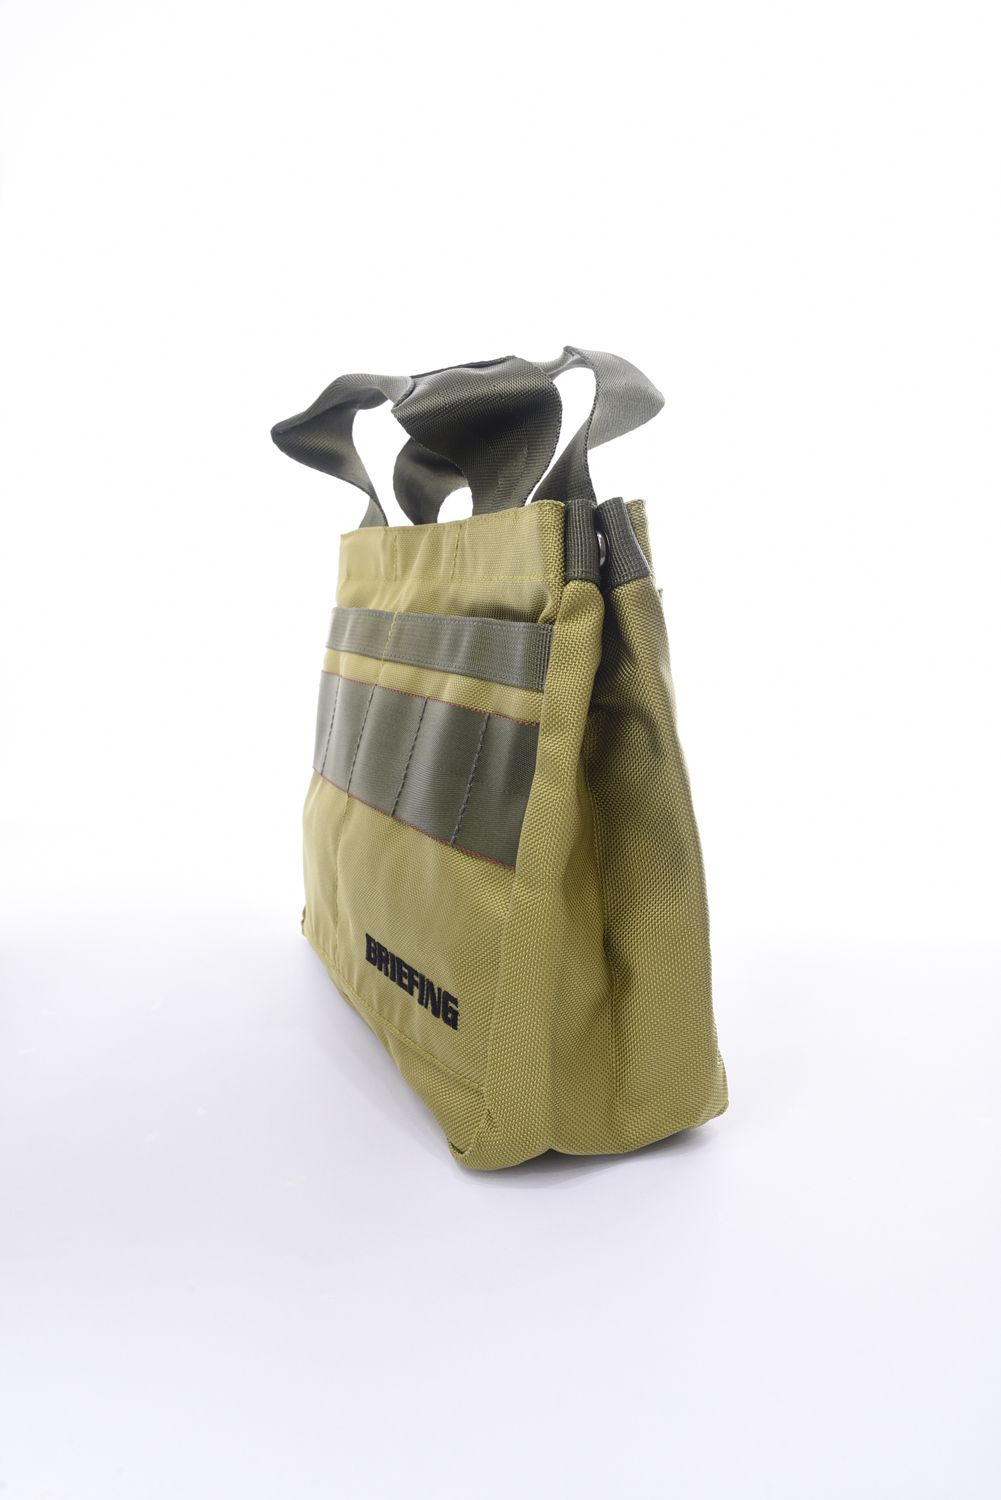 BRIEFING - CLASSIC CART TOTE AIR / カートトートバッグ カーキ